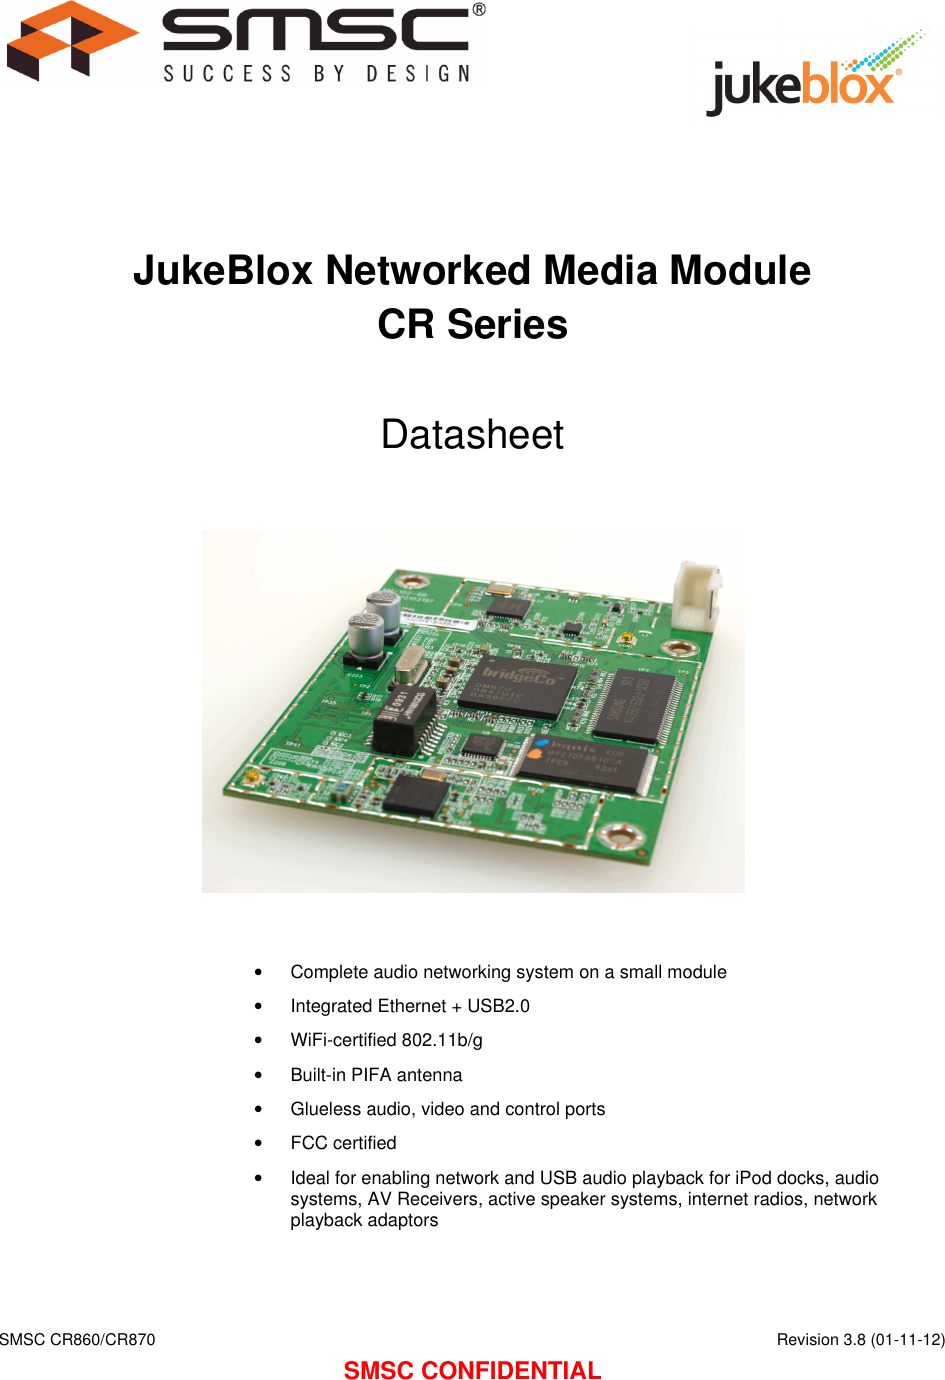    SMSC CR860/CR870      Revision 3.8 (01-11-12) SMSC CONFIDENTIAL      JukeBlox Networked Media Module CR Series  Datasheet                •  Complete audio networking system on a small module •  Integrated Ethernet + USB2.0 •  WiFi-certified 802.11b/g •  Built-in PIFA antenna •  Glueless audio, video and control ports •  FCC certified •  Ideal for enabling network and USB audio playback for iPod docks, audio systems, AV Receivers, active speaker systems, internet radios, network playback adaptors    